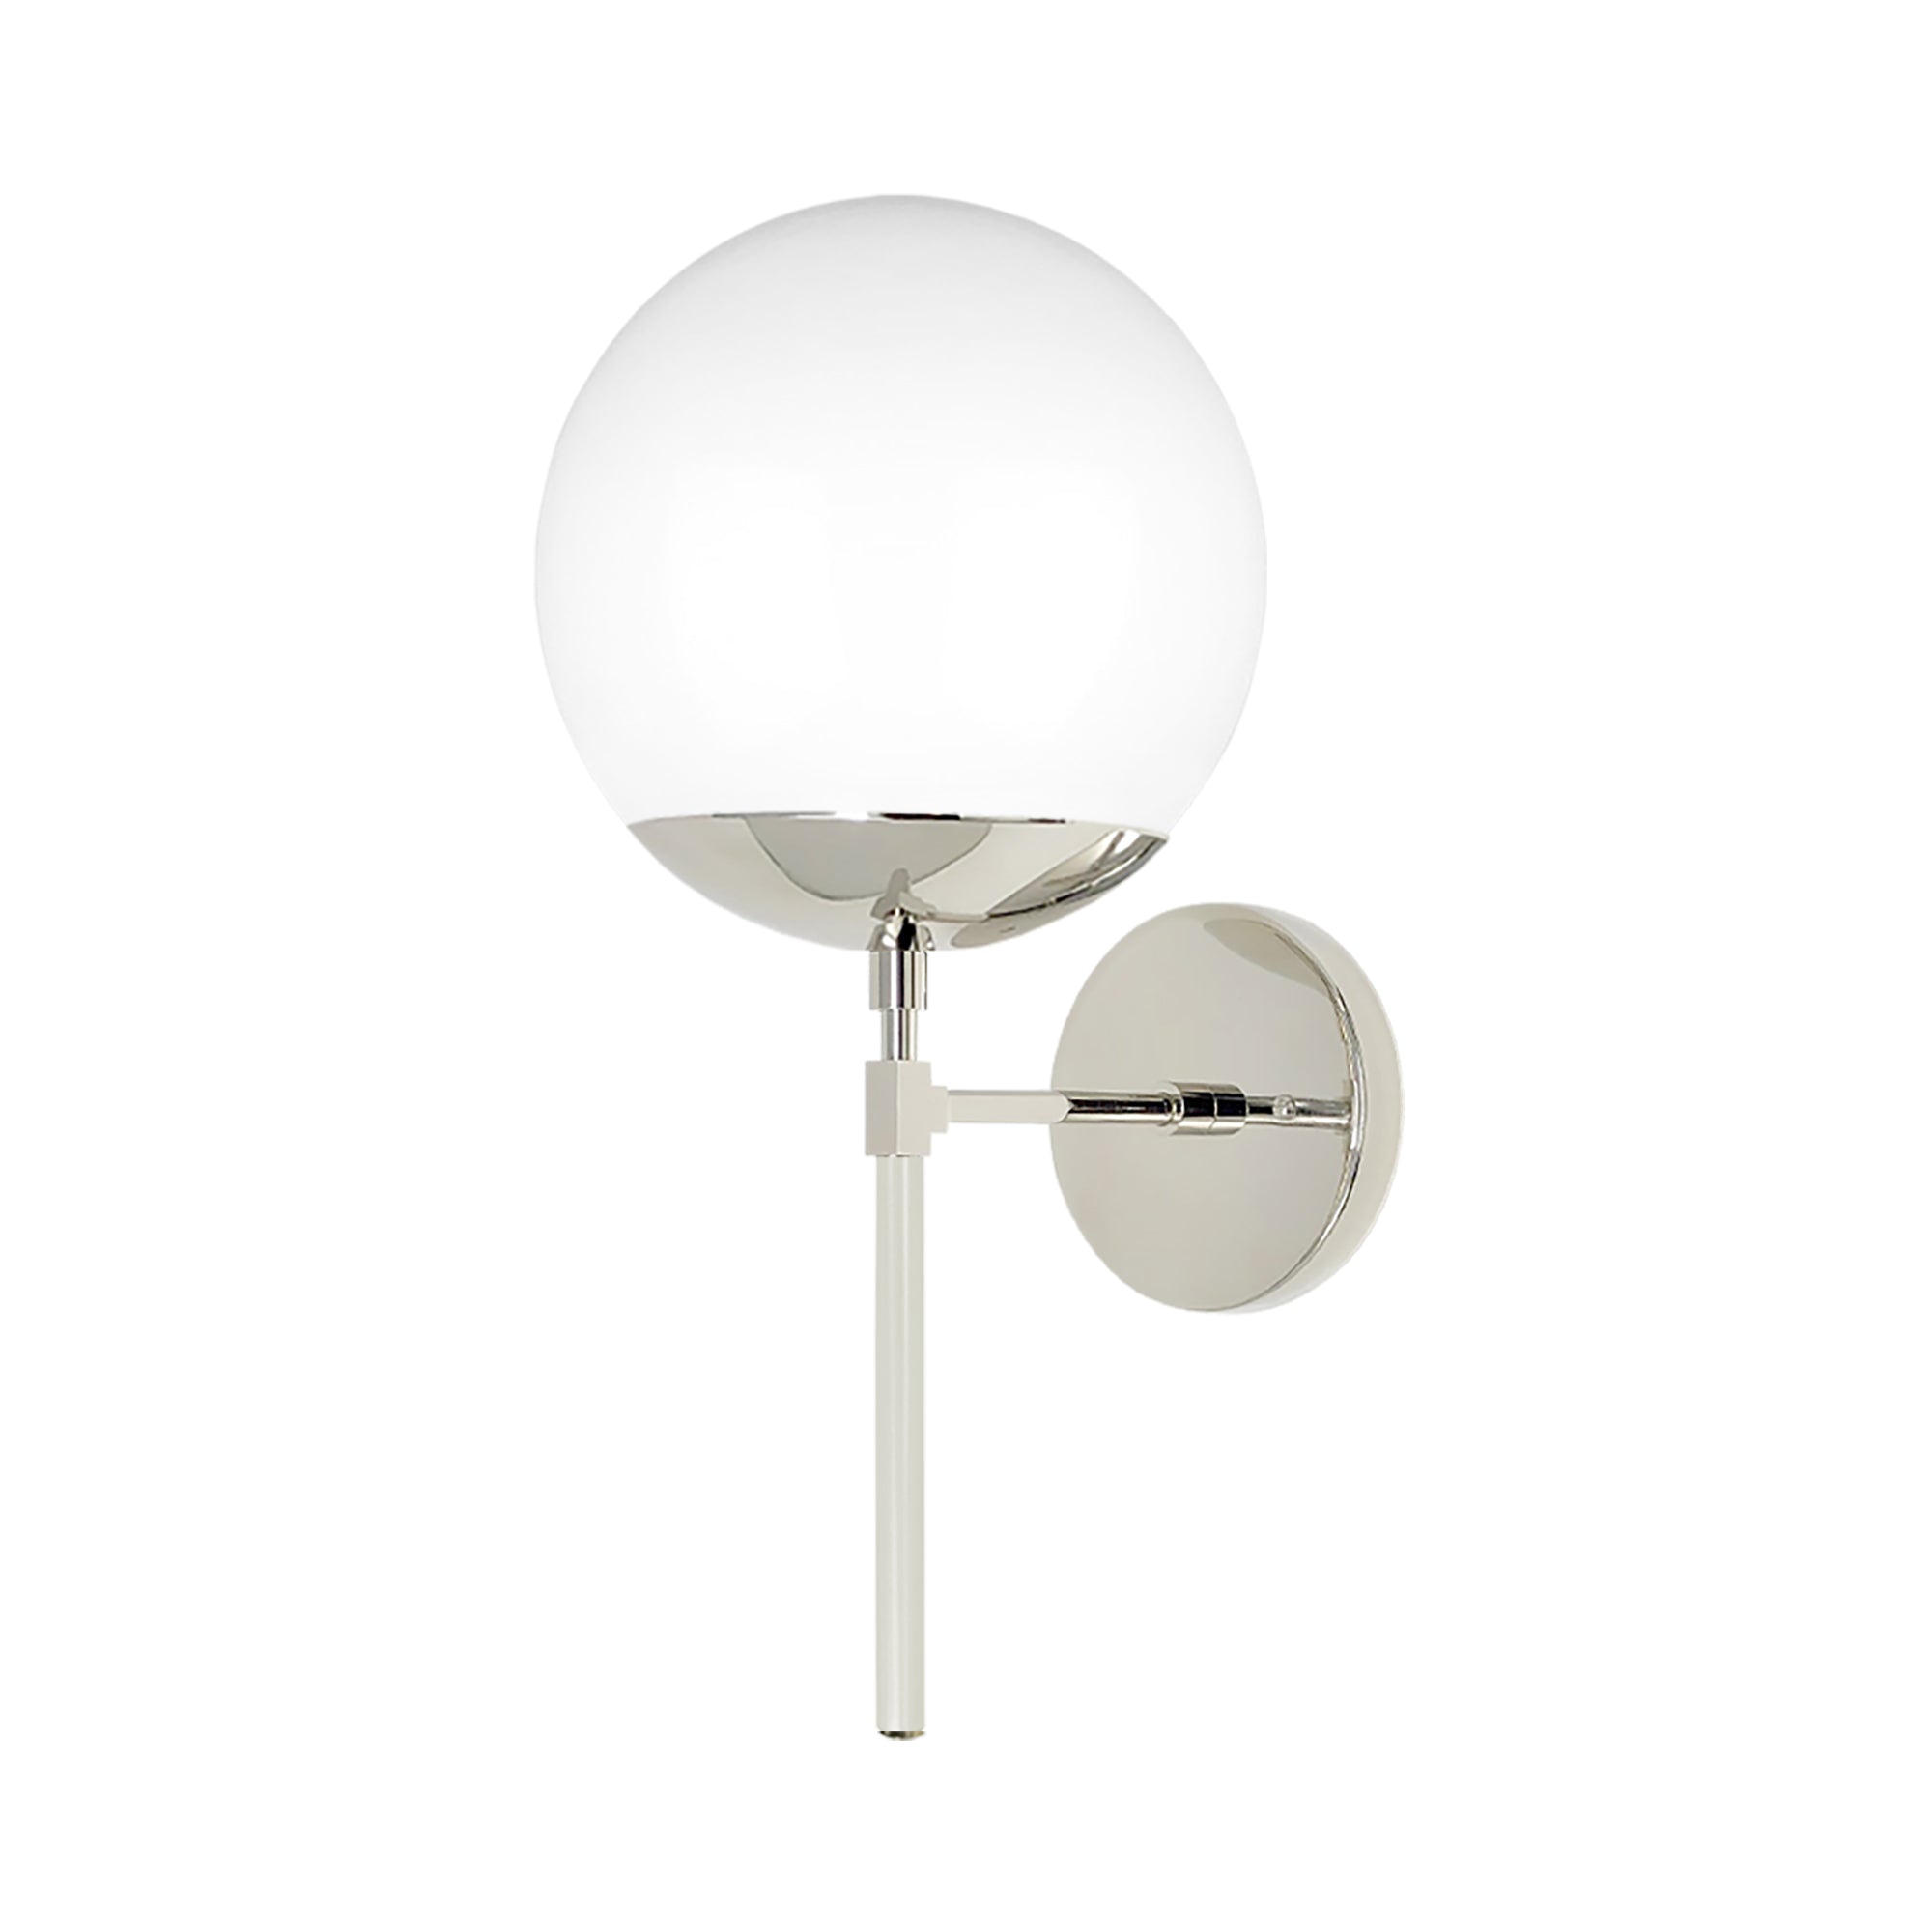 Nickel and bone color Lolli sconce 8" Dutton Brown lighting